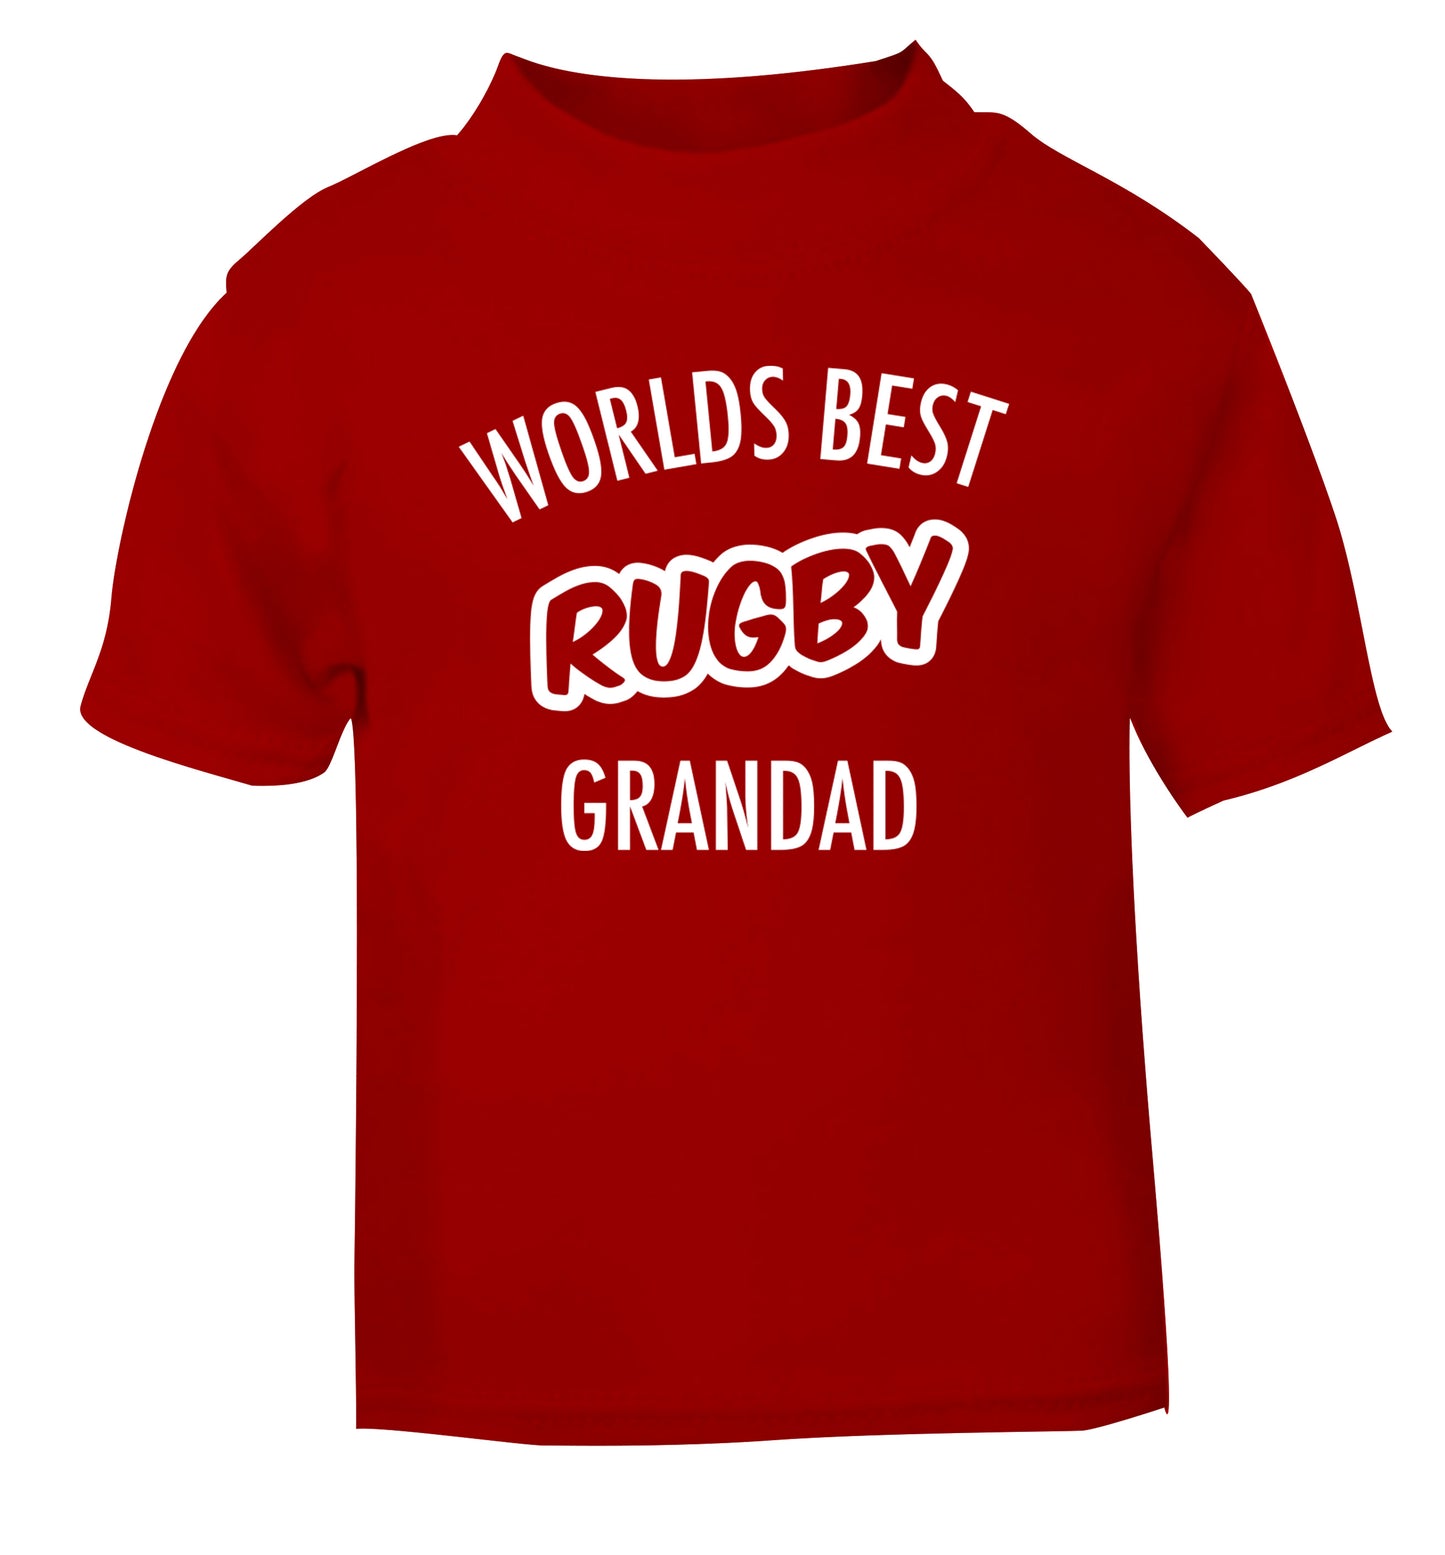 Worlds best rugby grandad red Baby Toddler Tshirt 2 Years